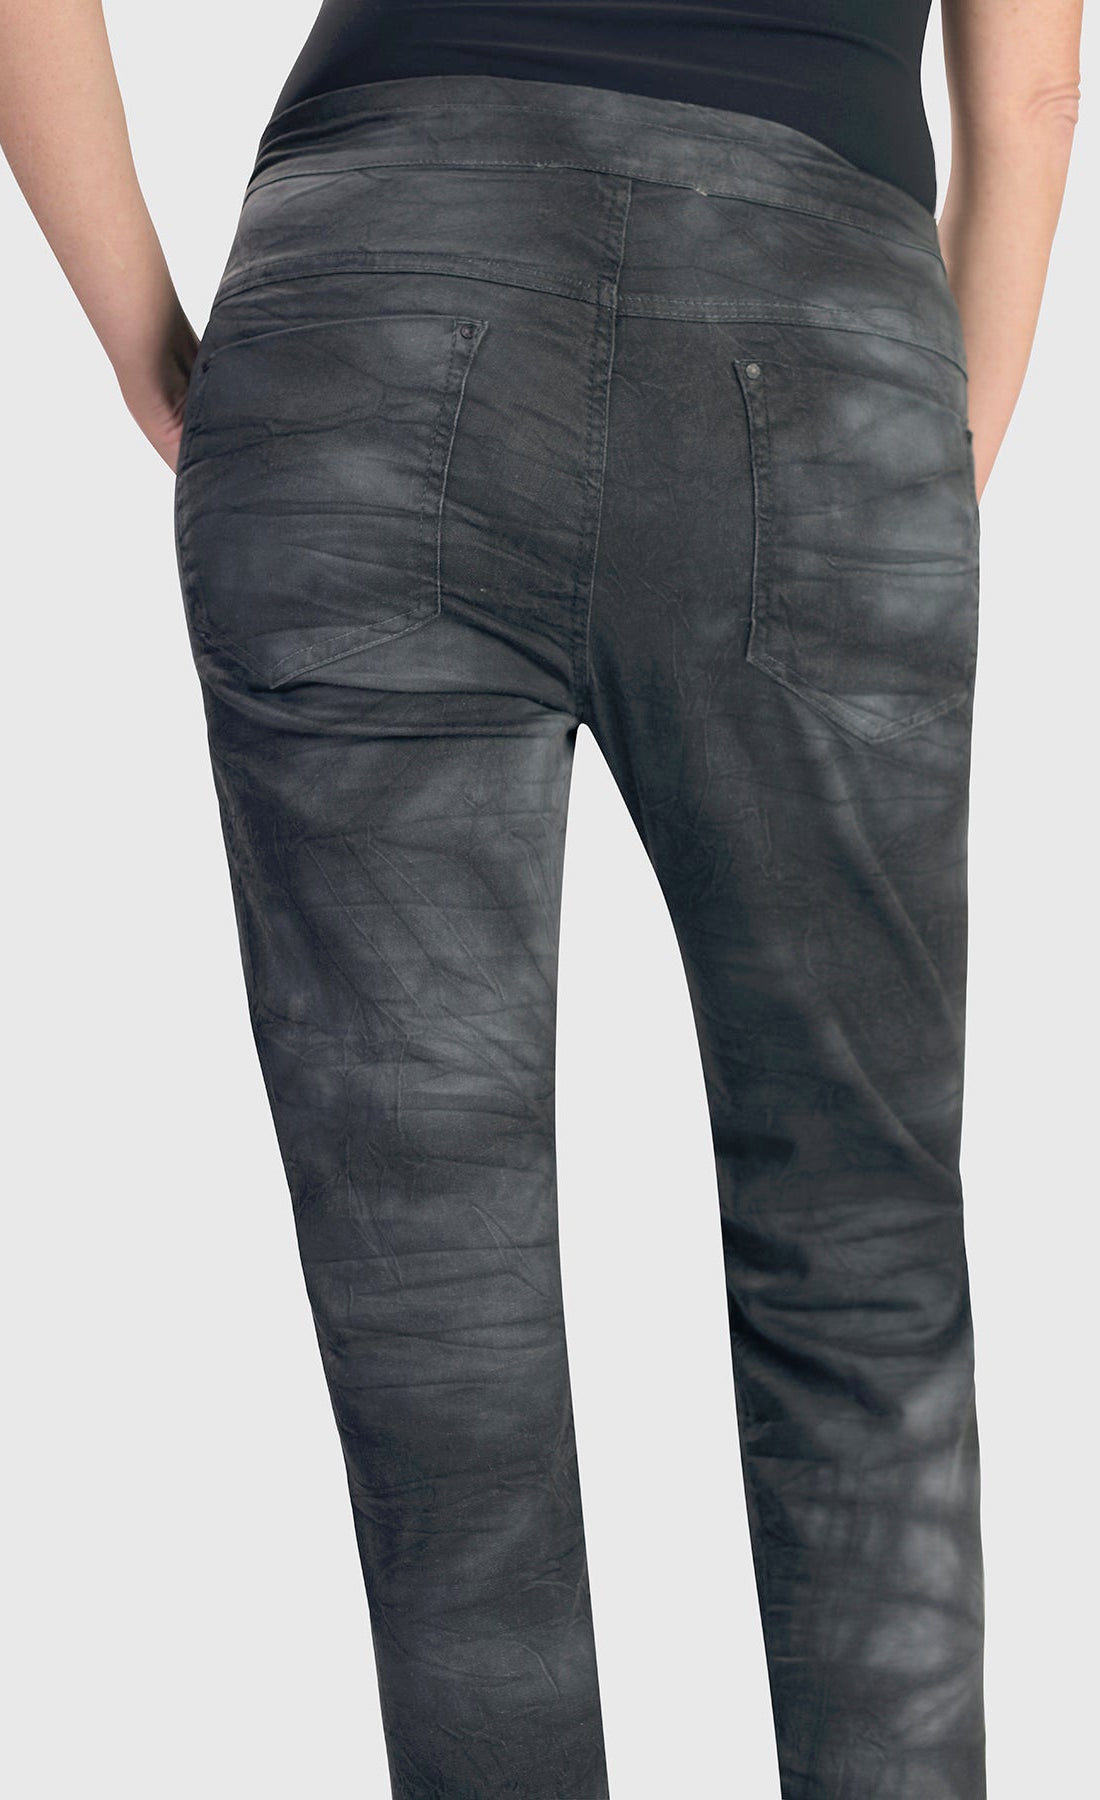 Back bottom half view of the alembika urban smoke iconic stretch jeans. These jeans have a relaxed slim fit and a washed grey print. The pant also has a yoked back and two back patch pockets.